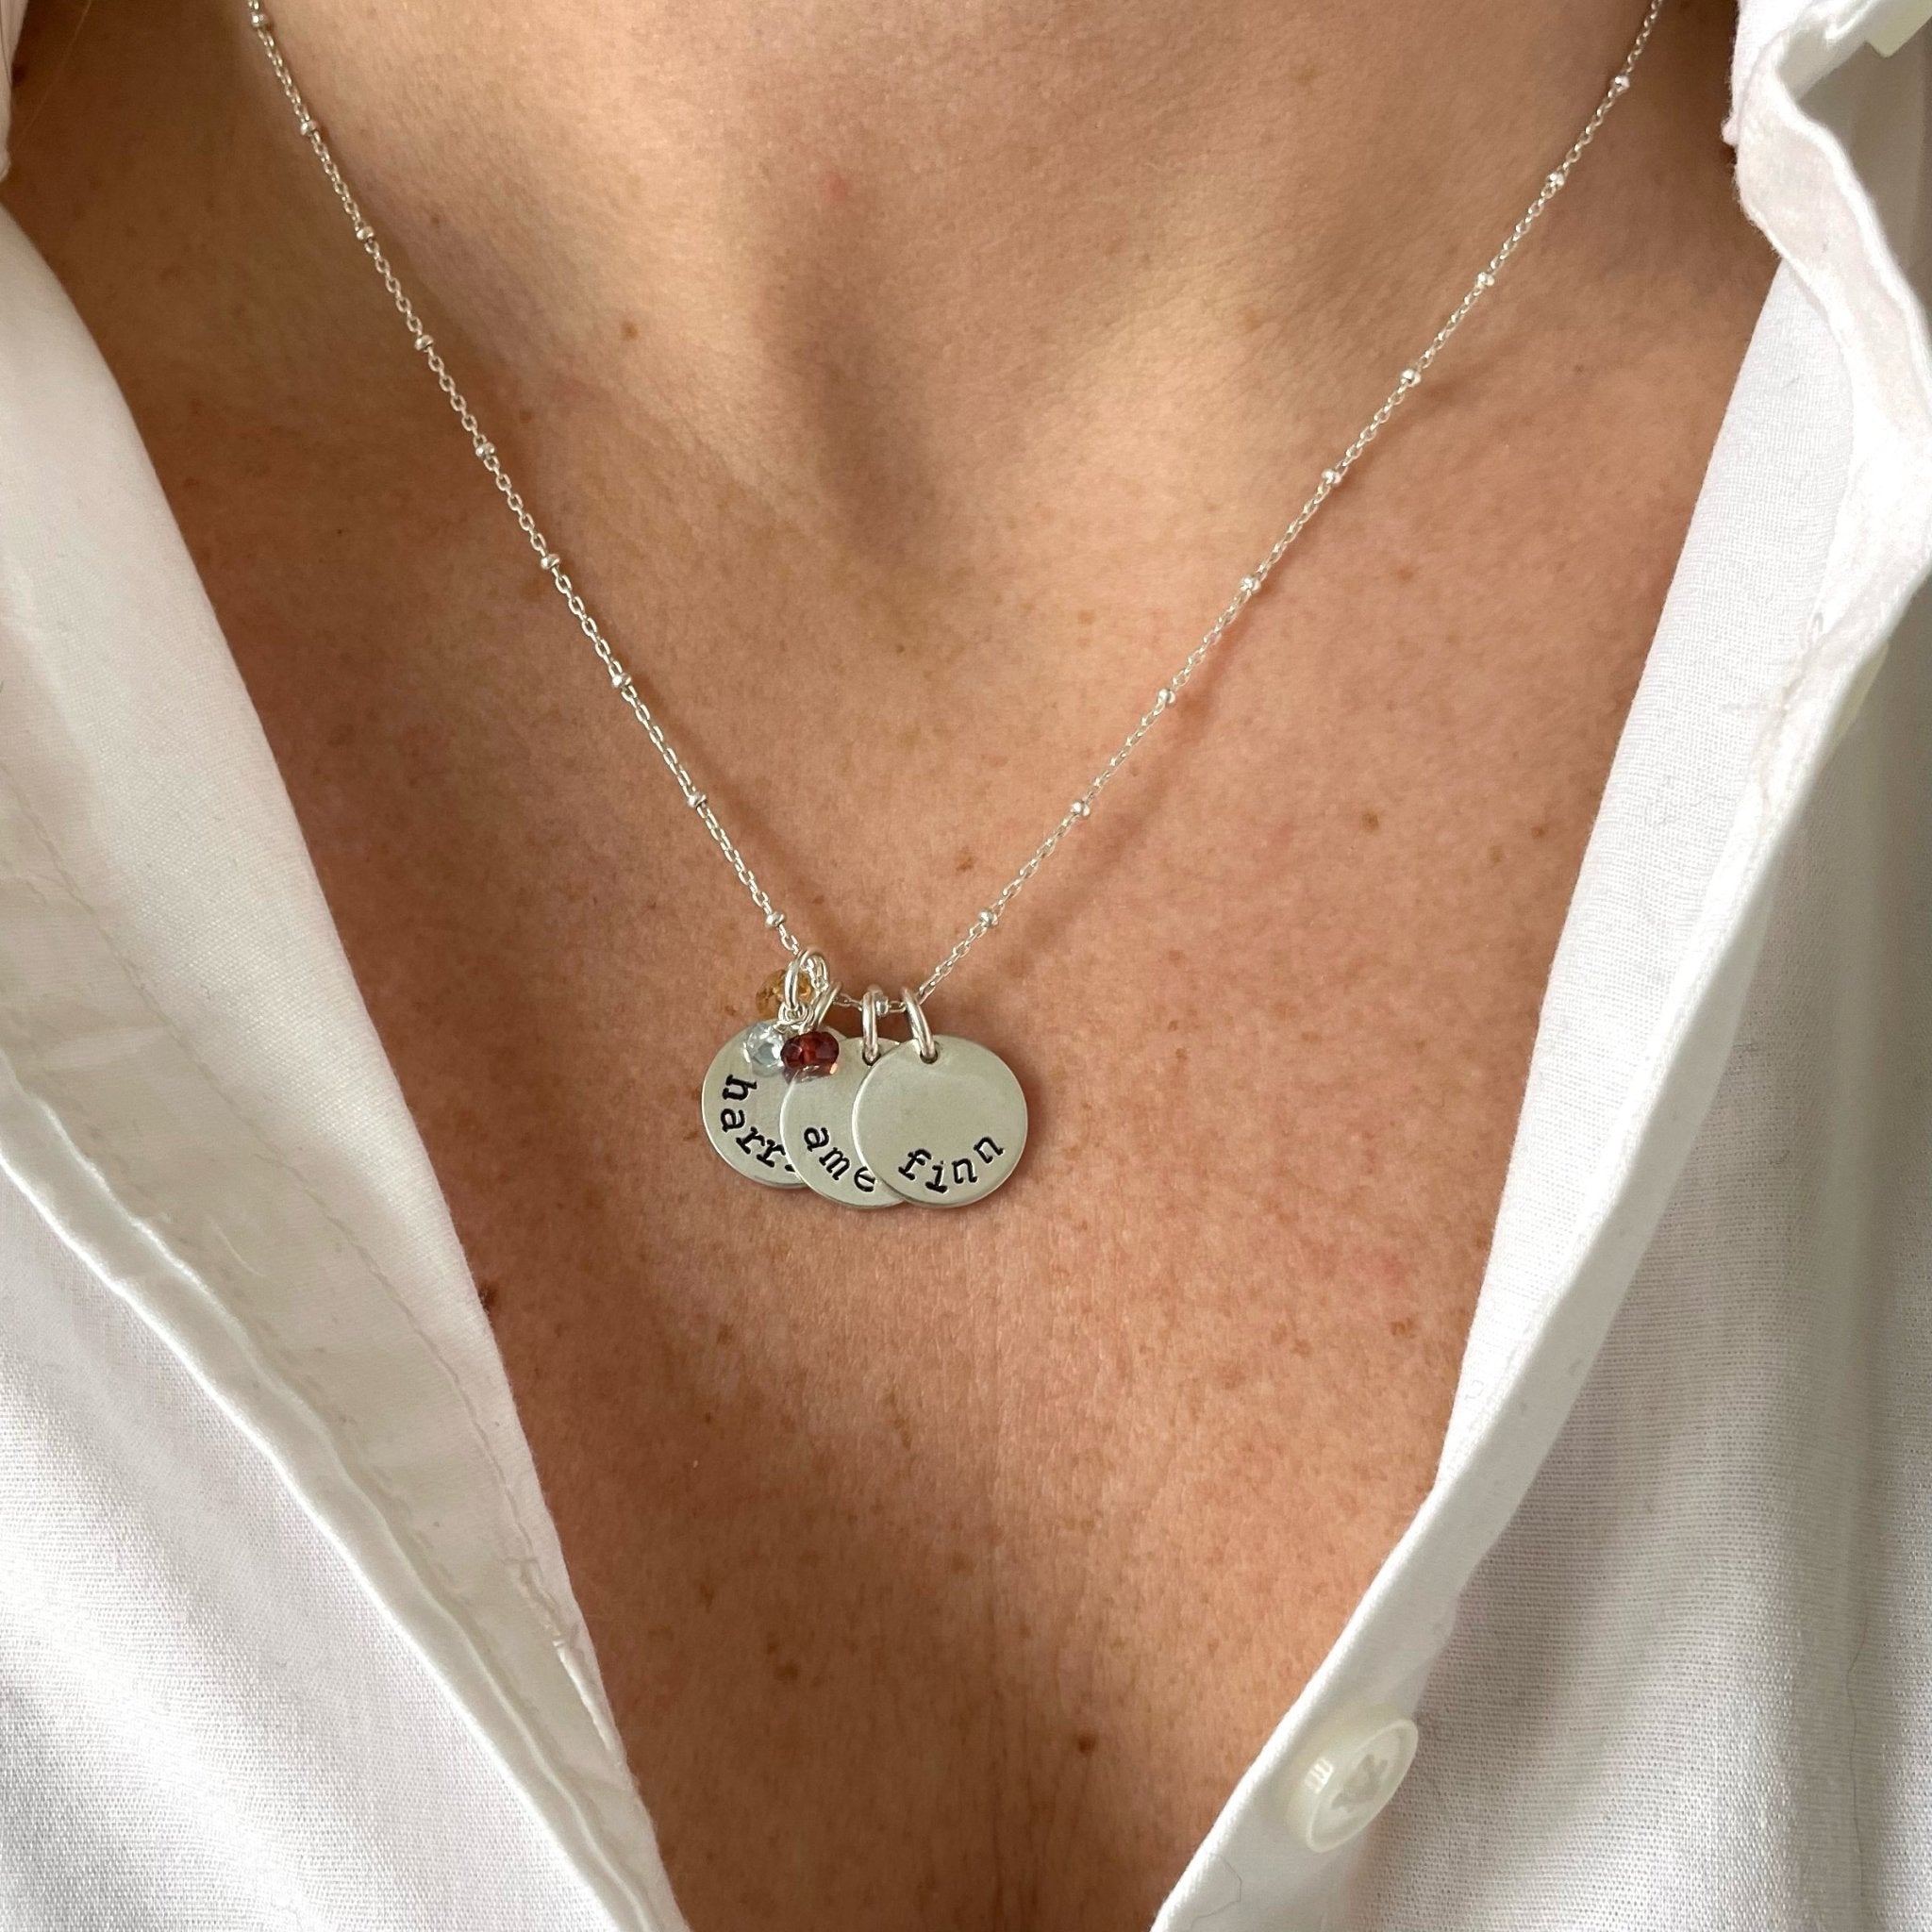 Woman's neckline with white button down and silver stamped disc necklace with link ball chain and 3 personalized stamped name discs and wire wrapped birthstones. Stella Necklace by Sarah Cornwell Jewelry